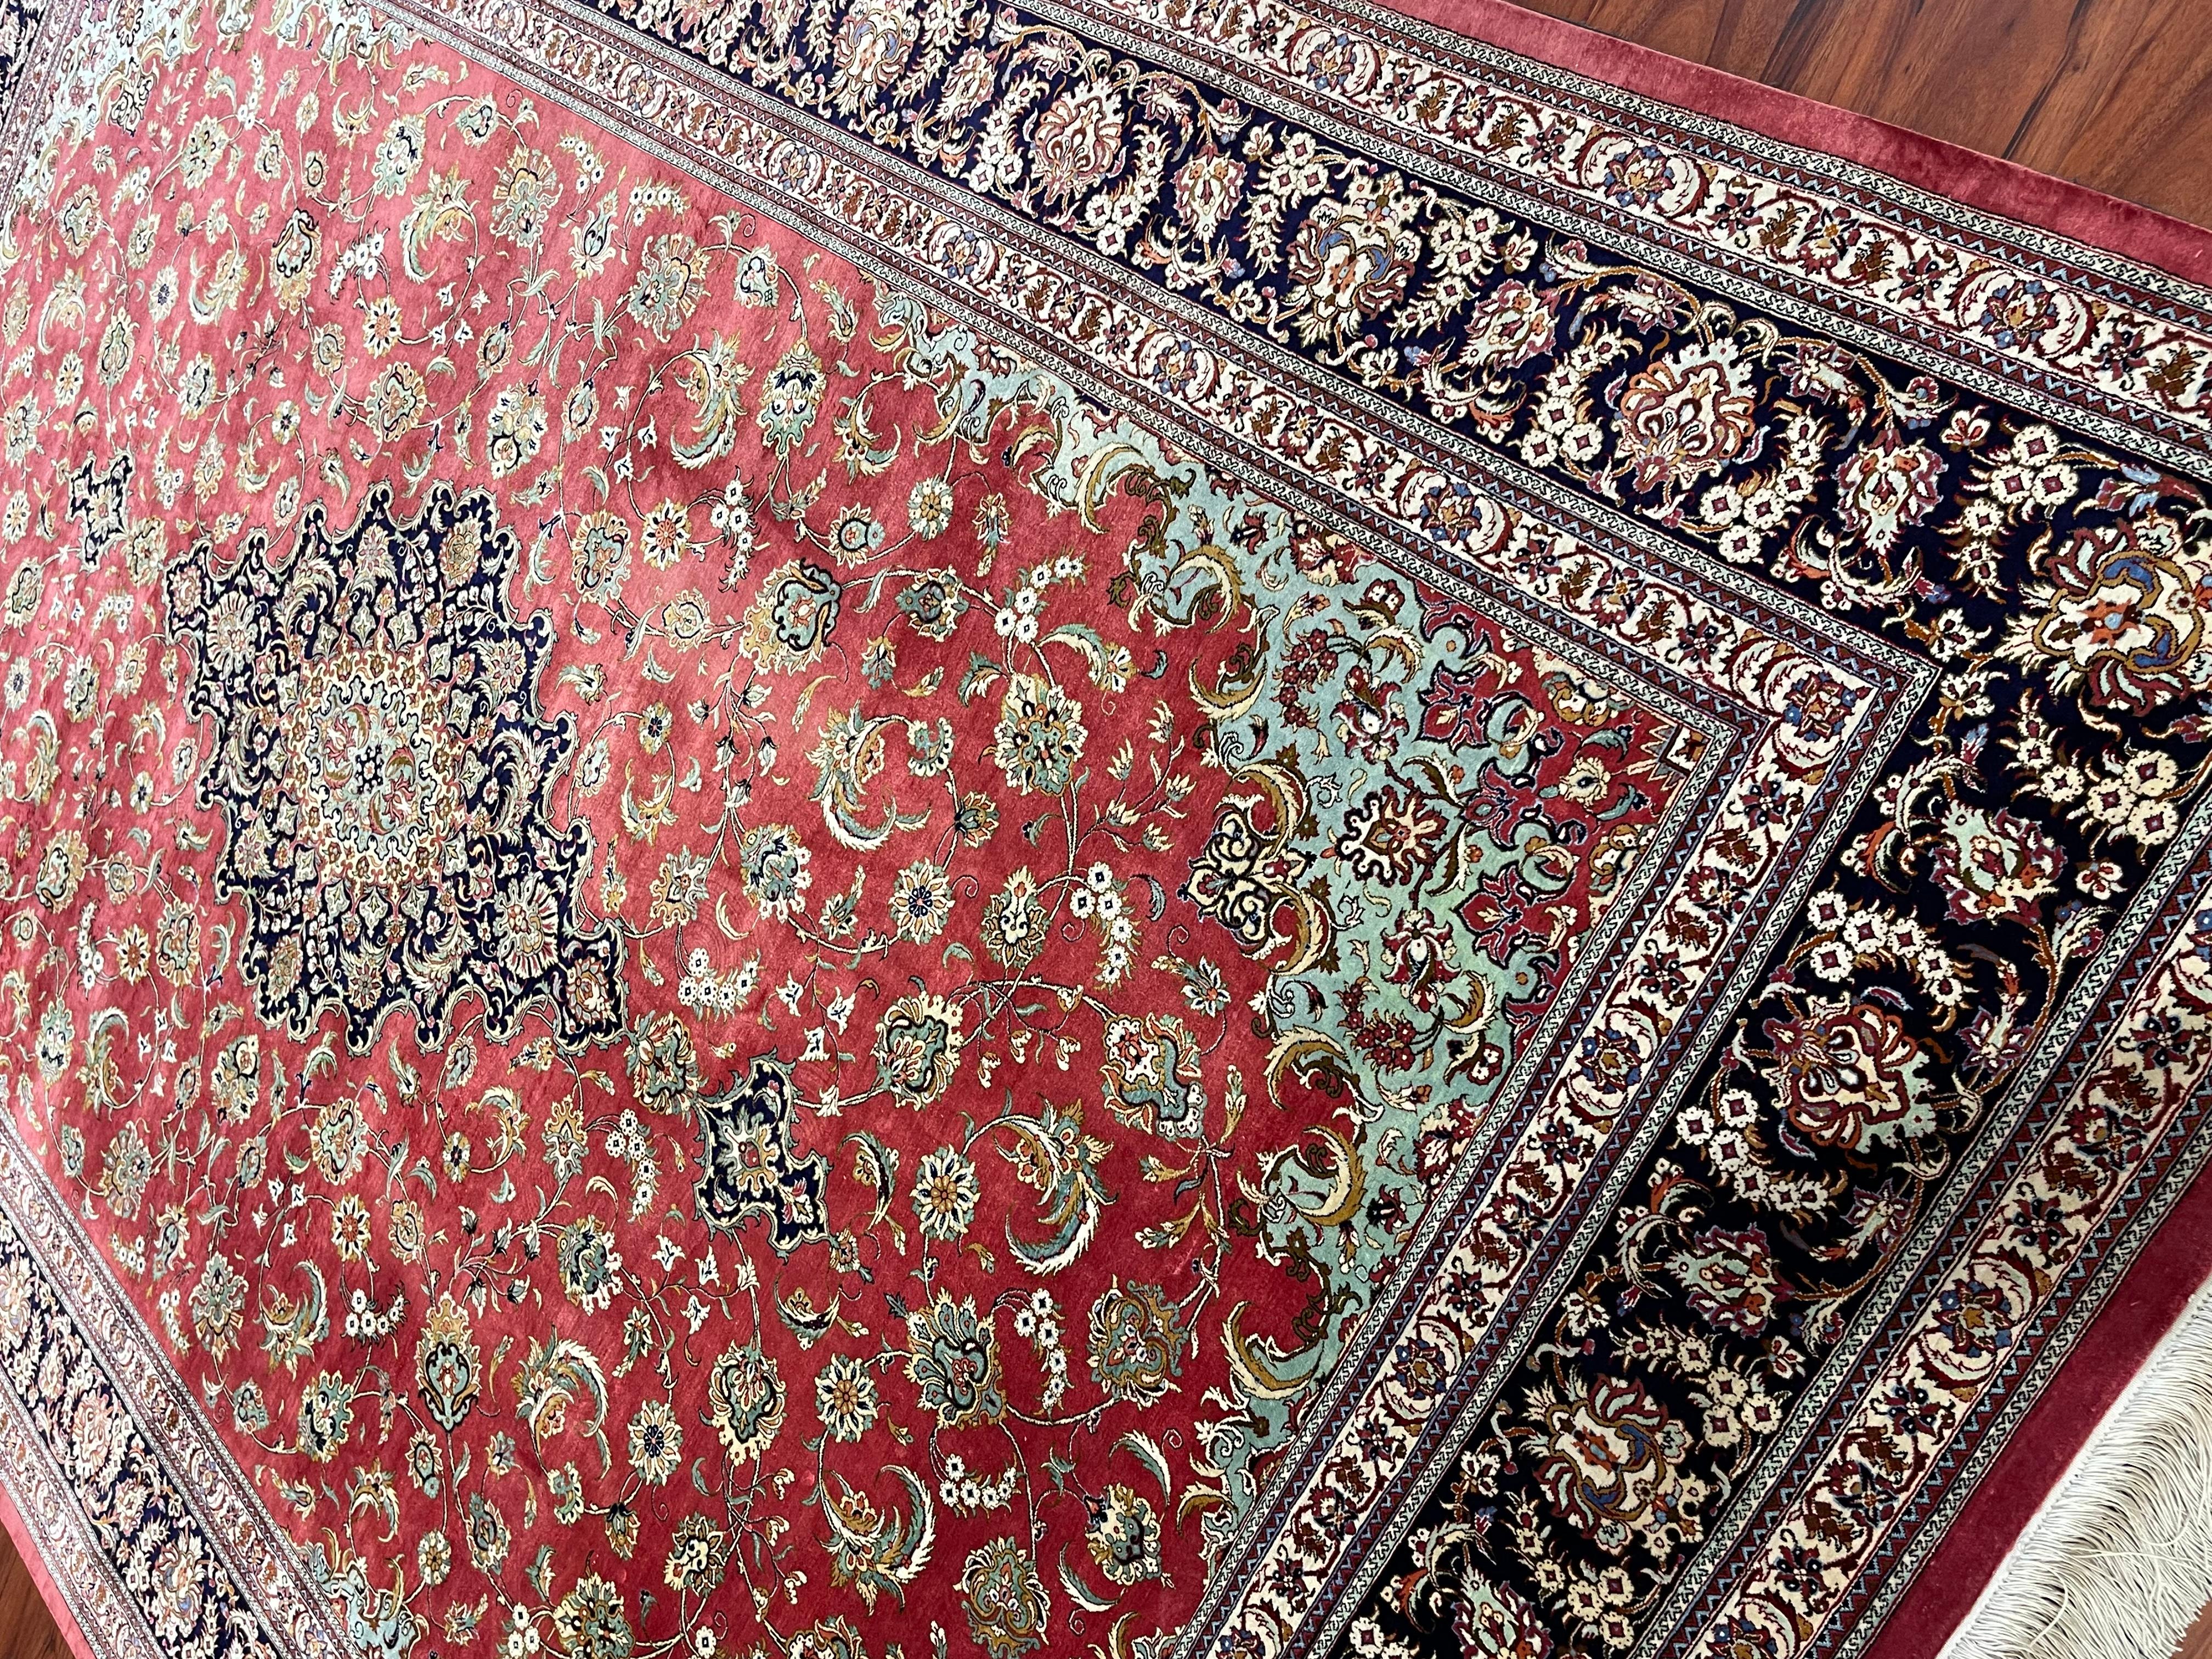 This is a Persian Silk Qum rug originated from iran. The Material is 100% silk. The Dimensions are 6’5” X 9’10” ft. Condition of the item is purely Excellent. Circa (Date of manufacture) 20th century.
 